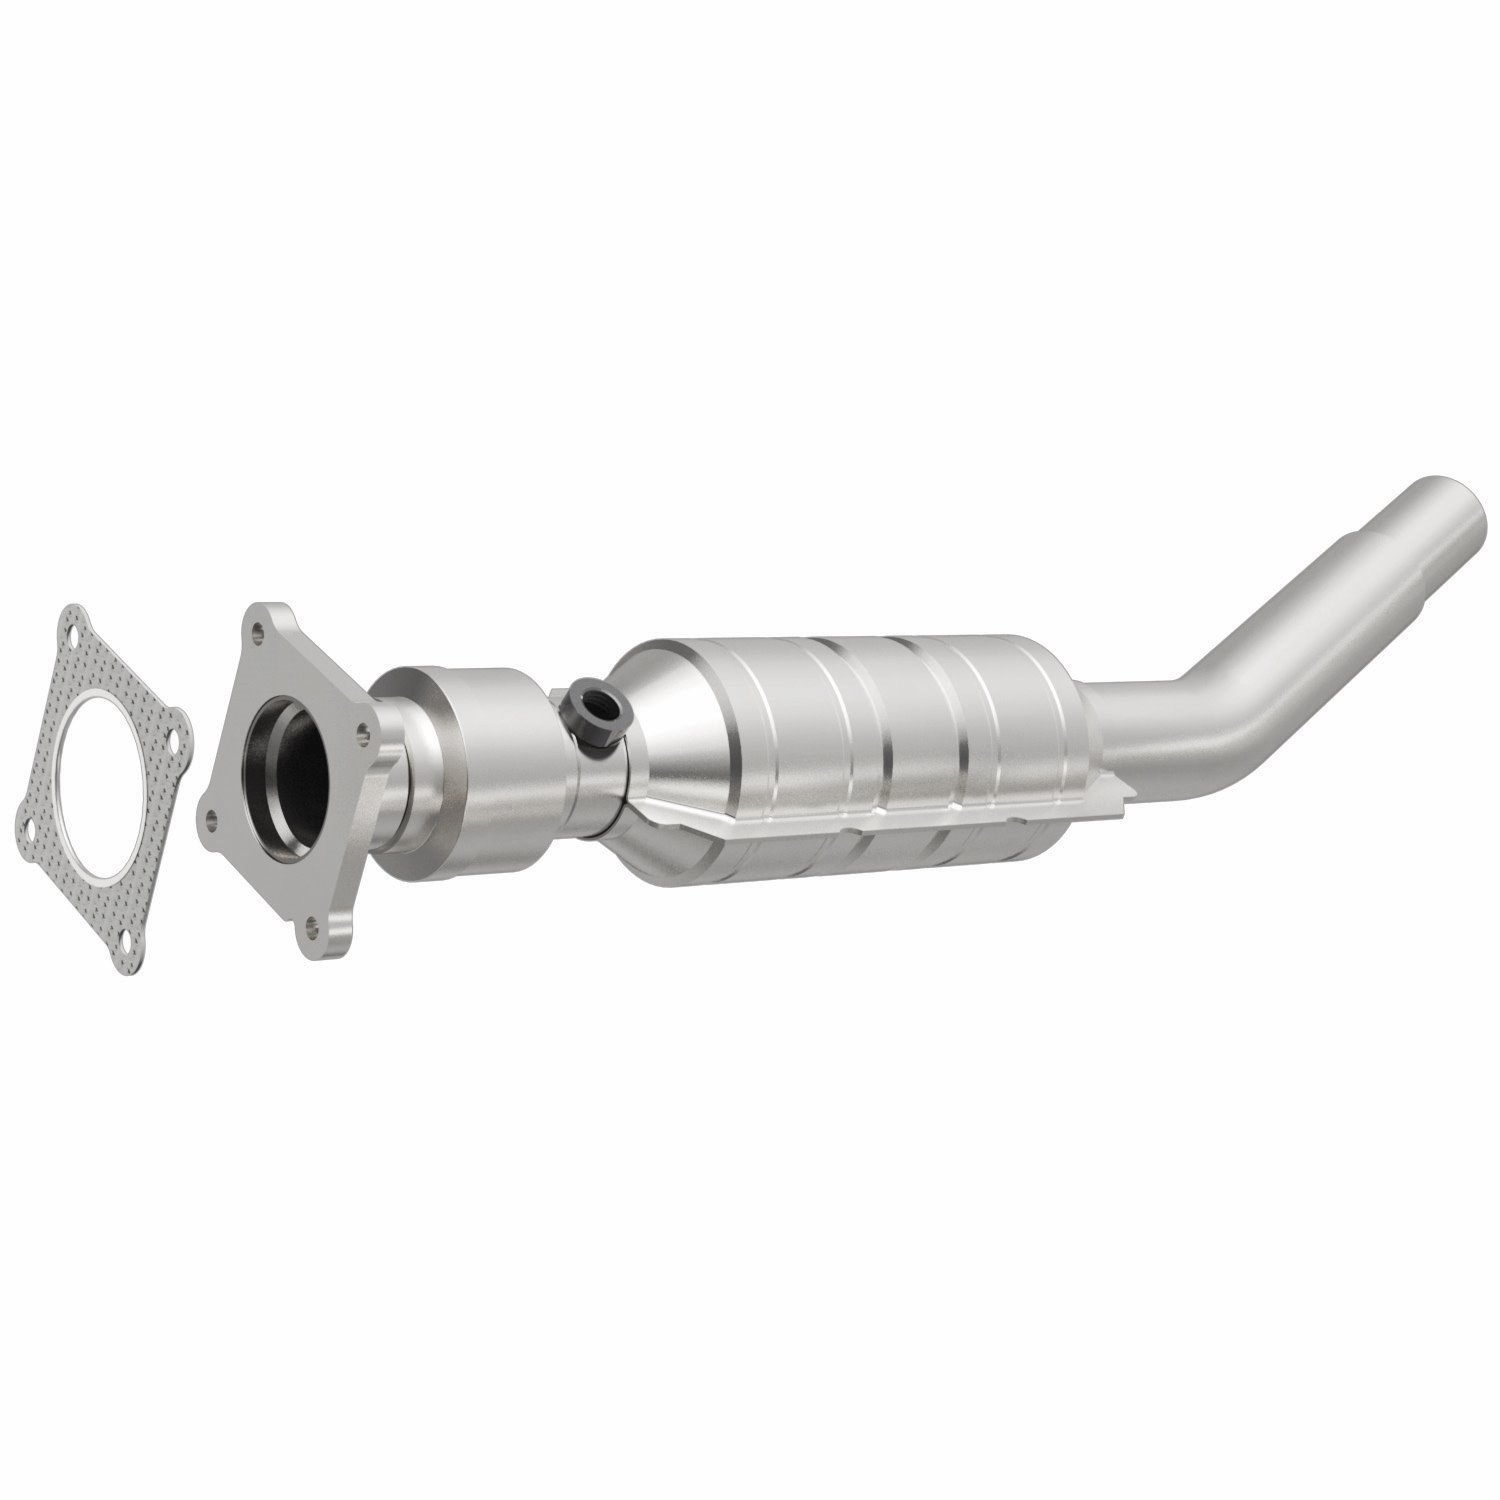 HM Grade Federal / EPA Compliant Direct-Fit Catalytic